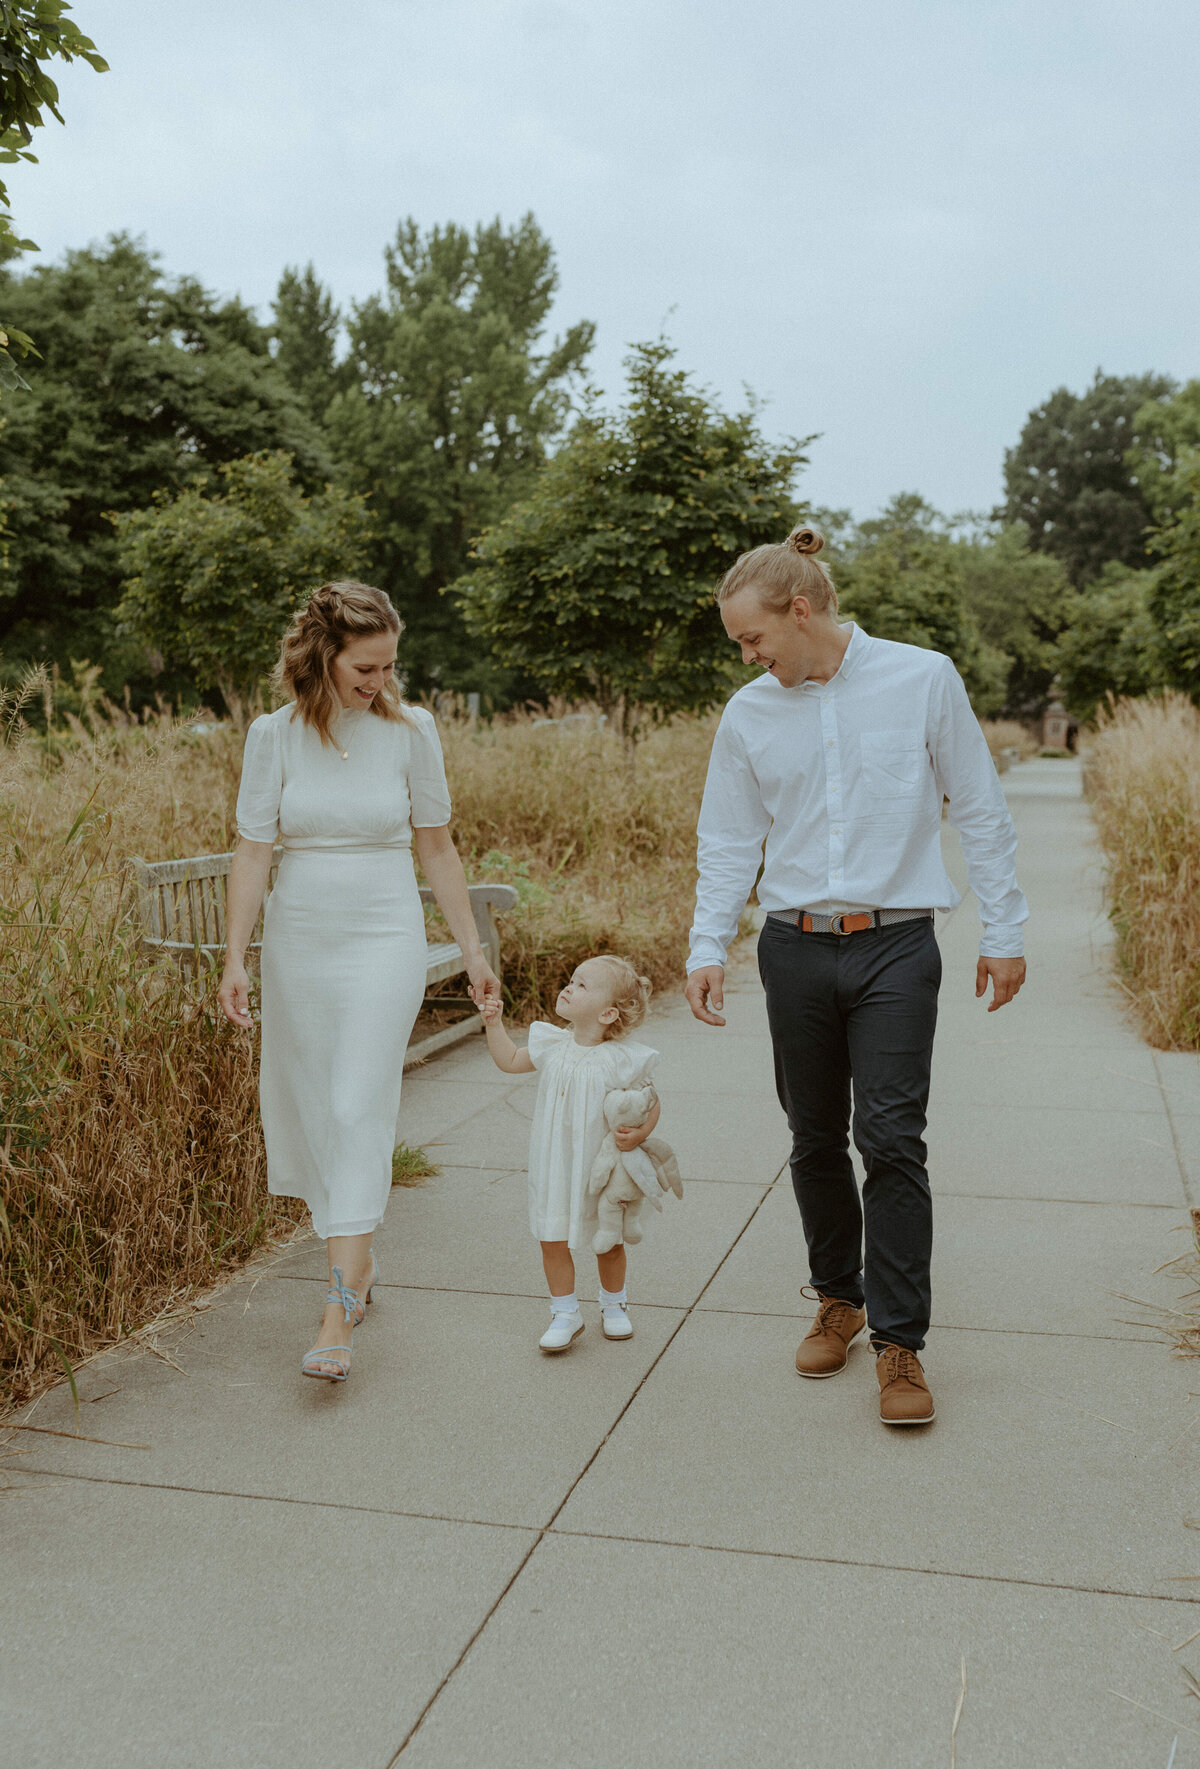 JustJessPhotography_Indianapolis Photographer_Brittany&Hank Holliday Park elopement111